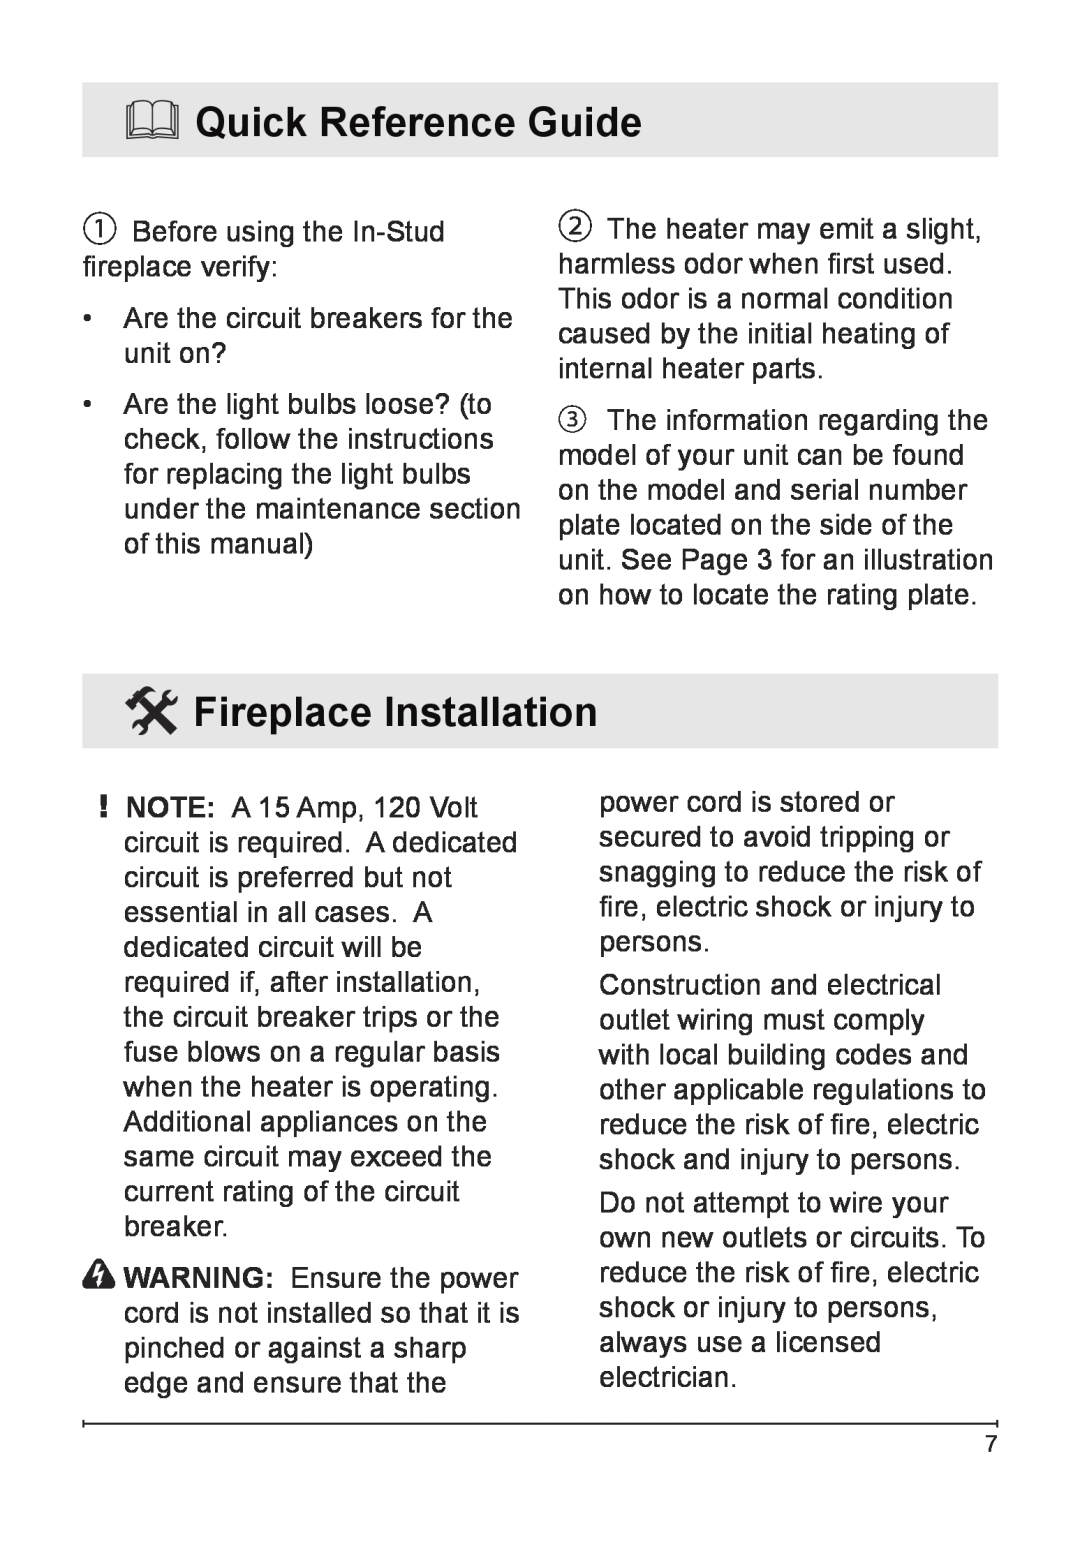 Dimplex VCX1525-WH owner manual Quick Reference Guide, Fireplace Installation 